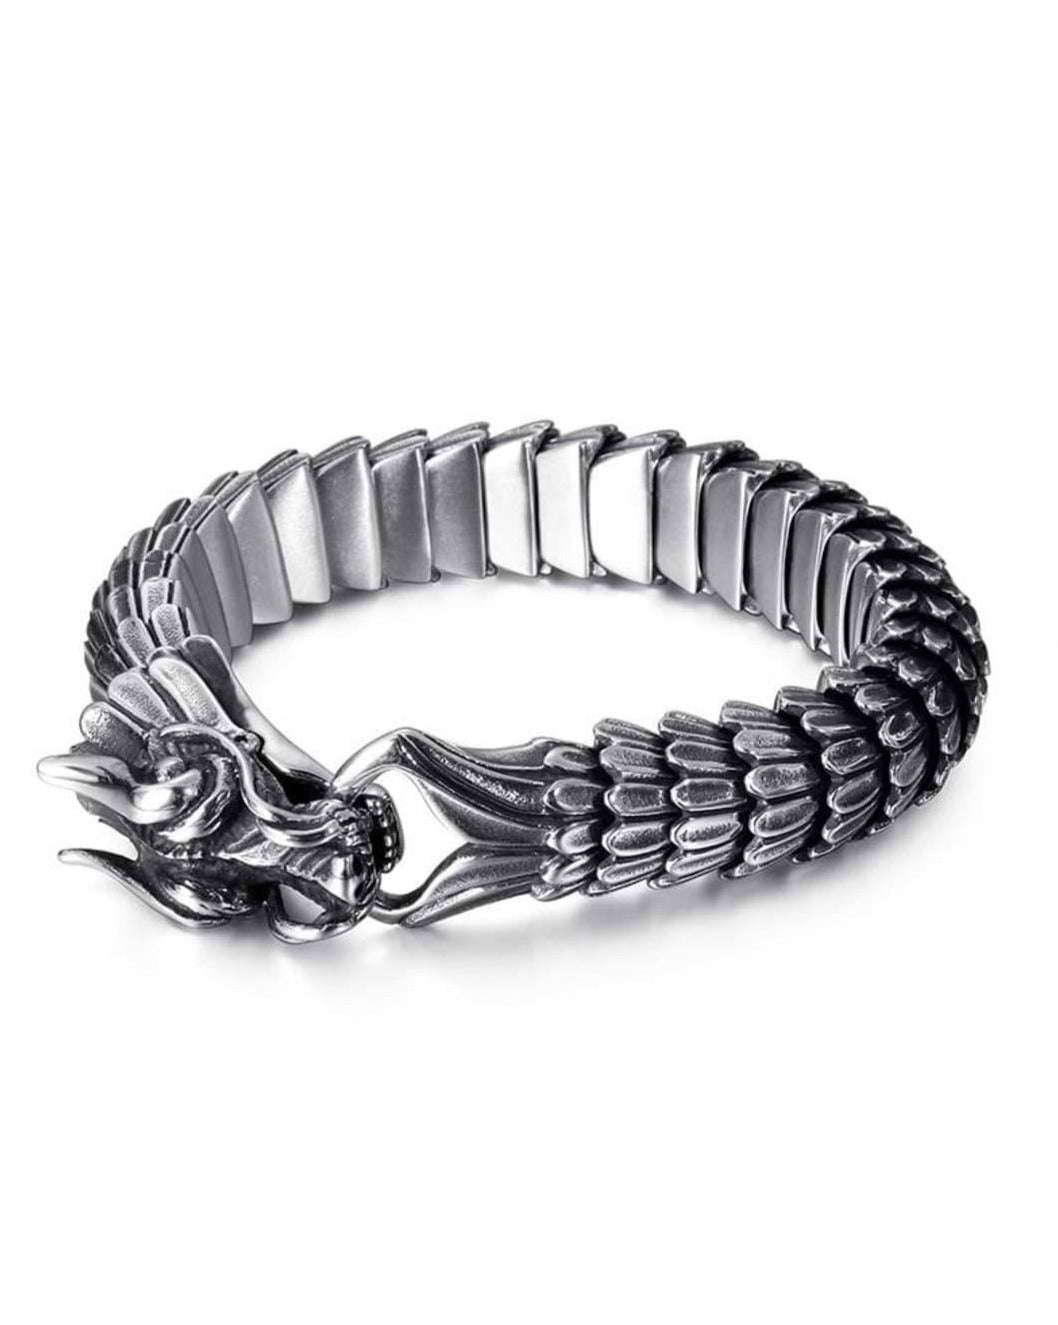 Aggregate more than 76 dragon head bracelet meaning  POPPY